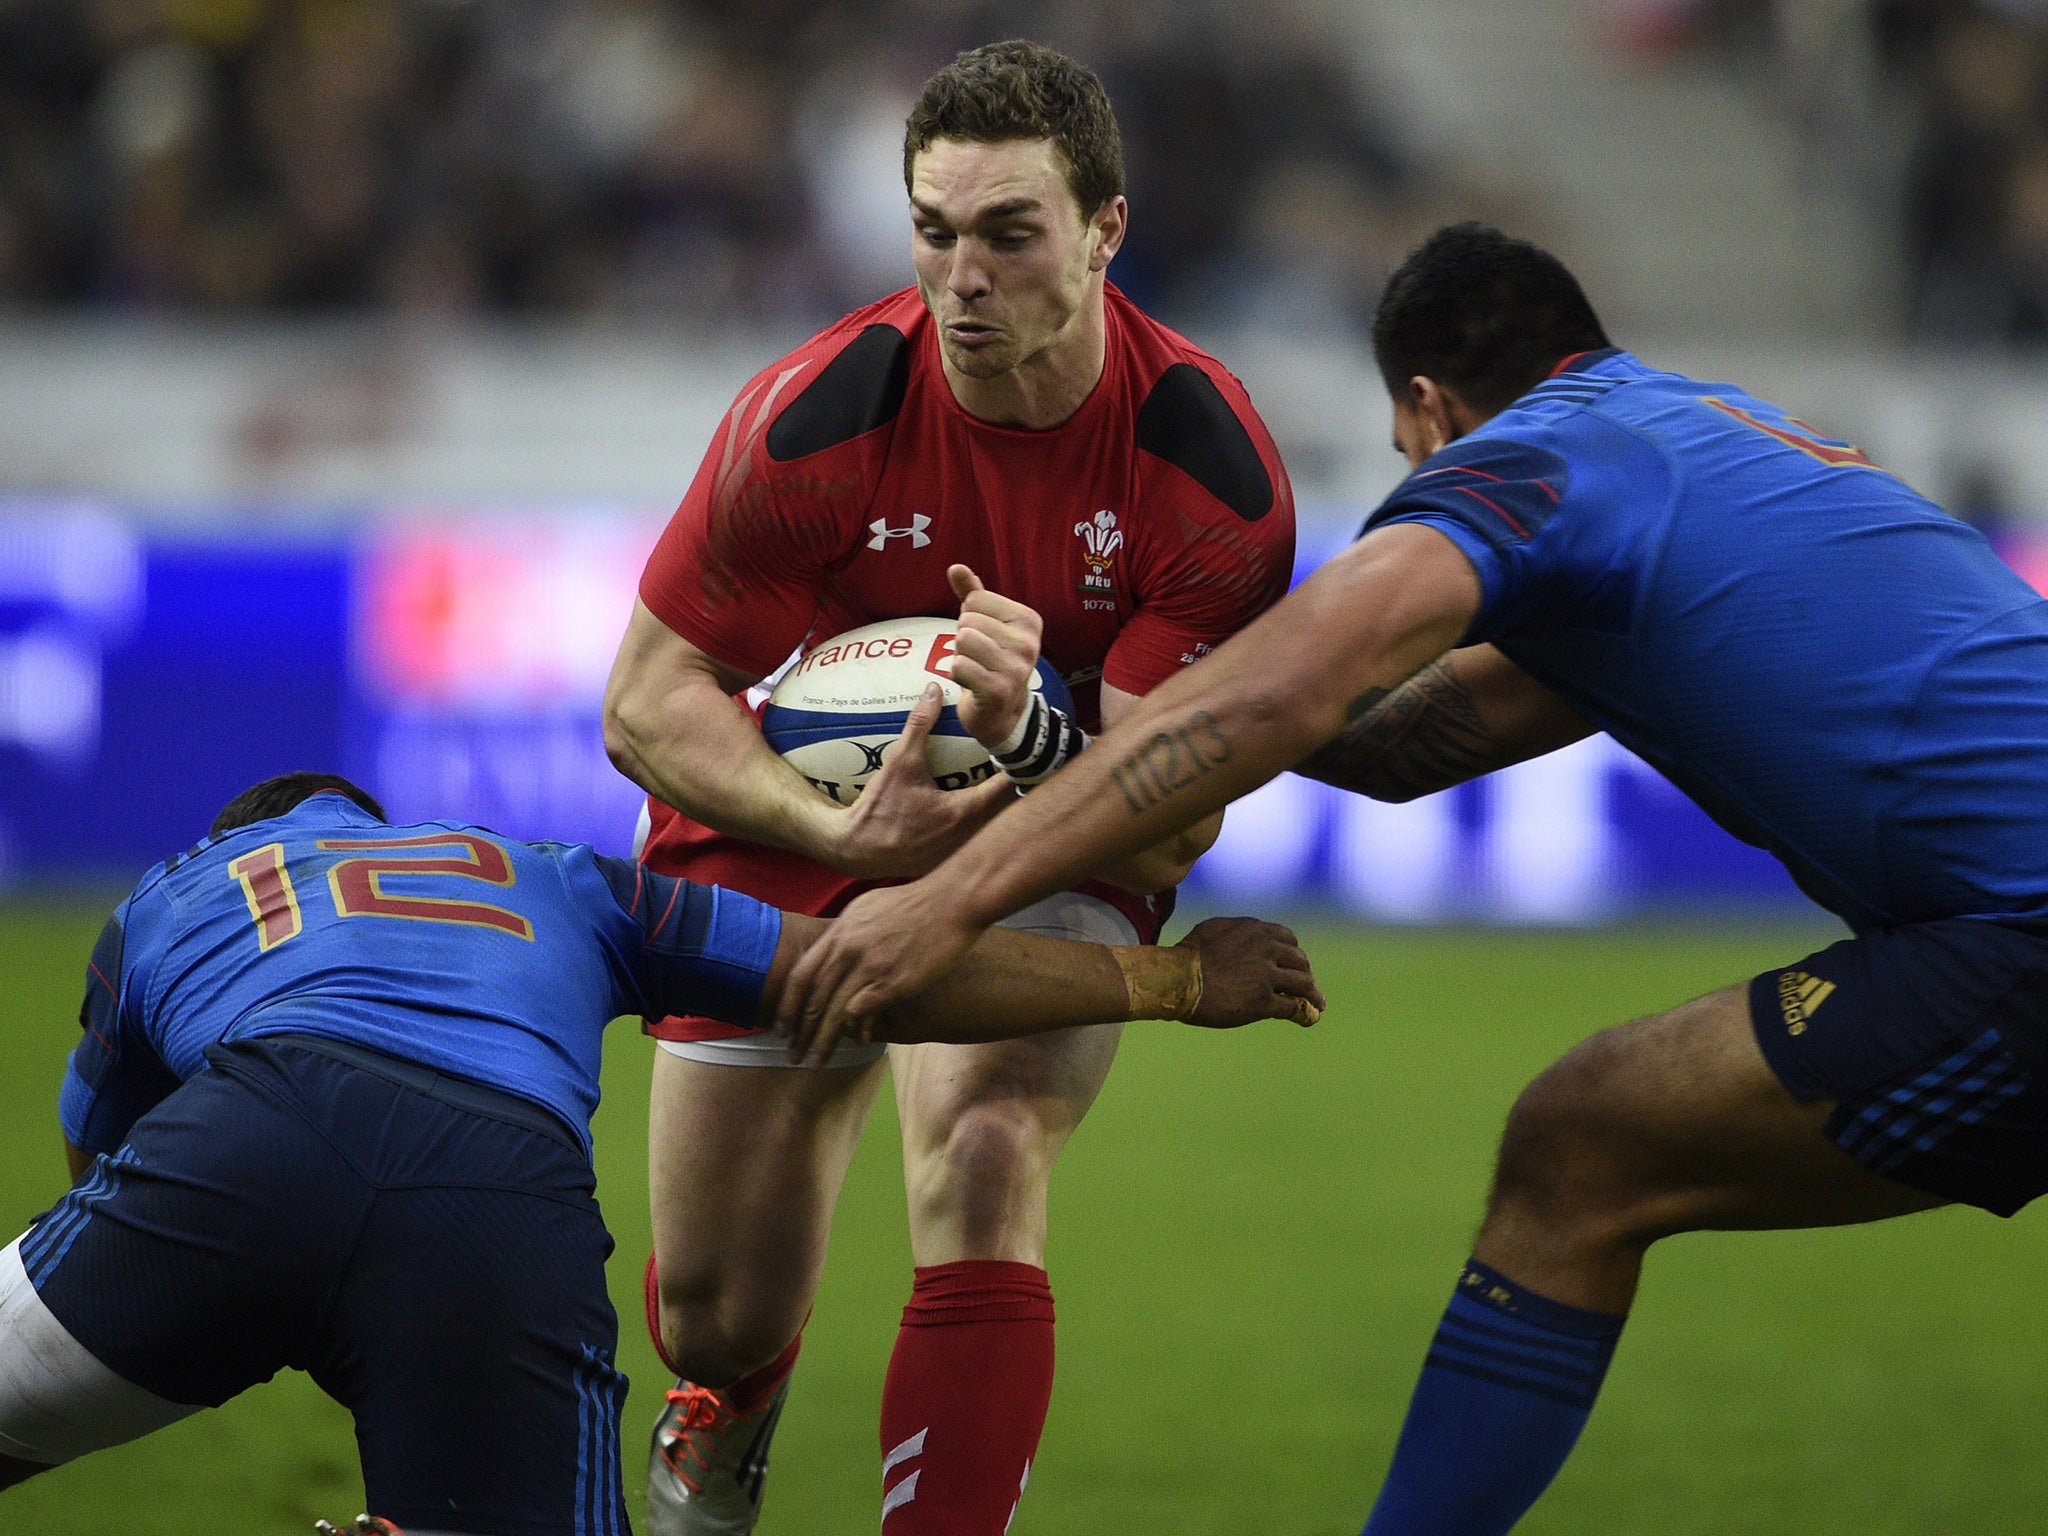 George North has not played since he was knocked unconscious for Saints against Wasps in March